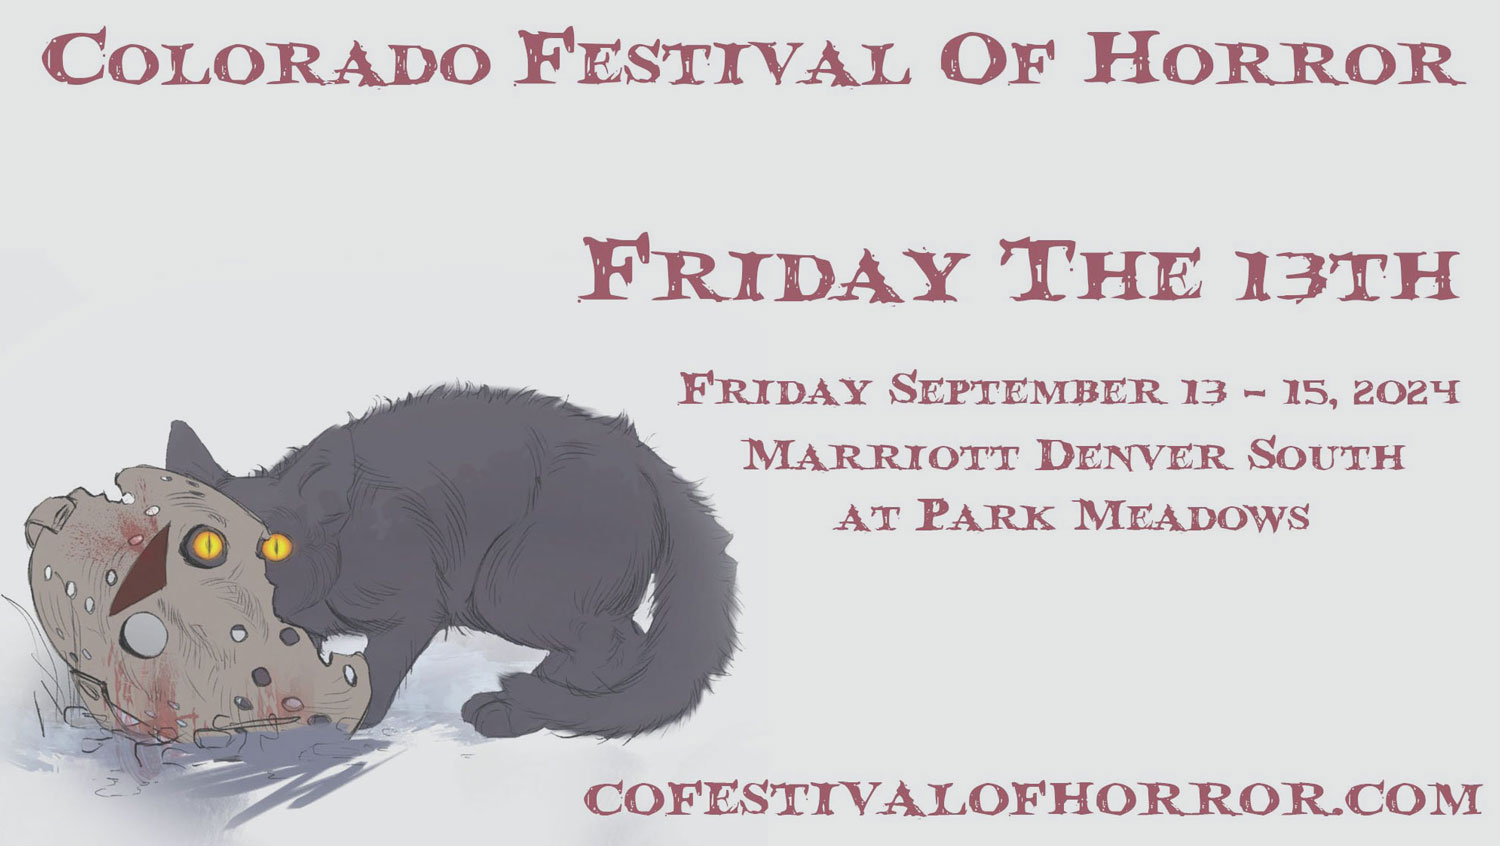 Hand drawn picture of a black cat with a skull in the bottom left corner and the text about Colorado Festival of Horror and the dates